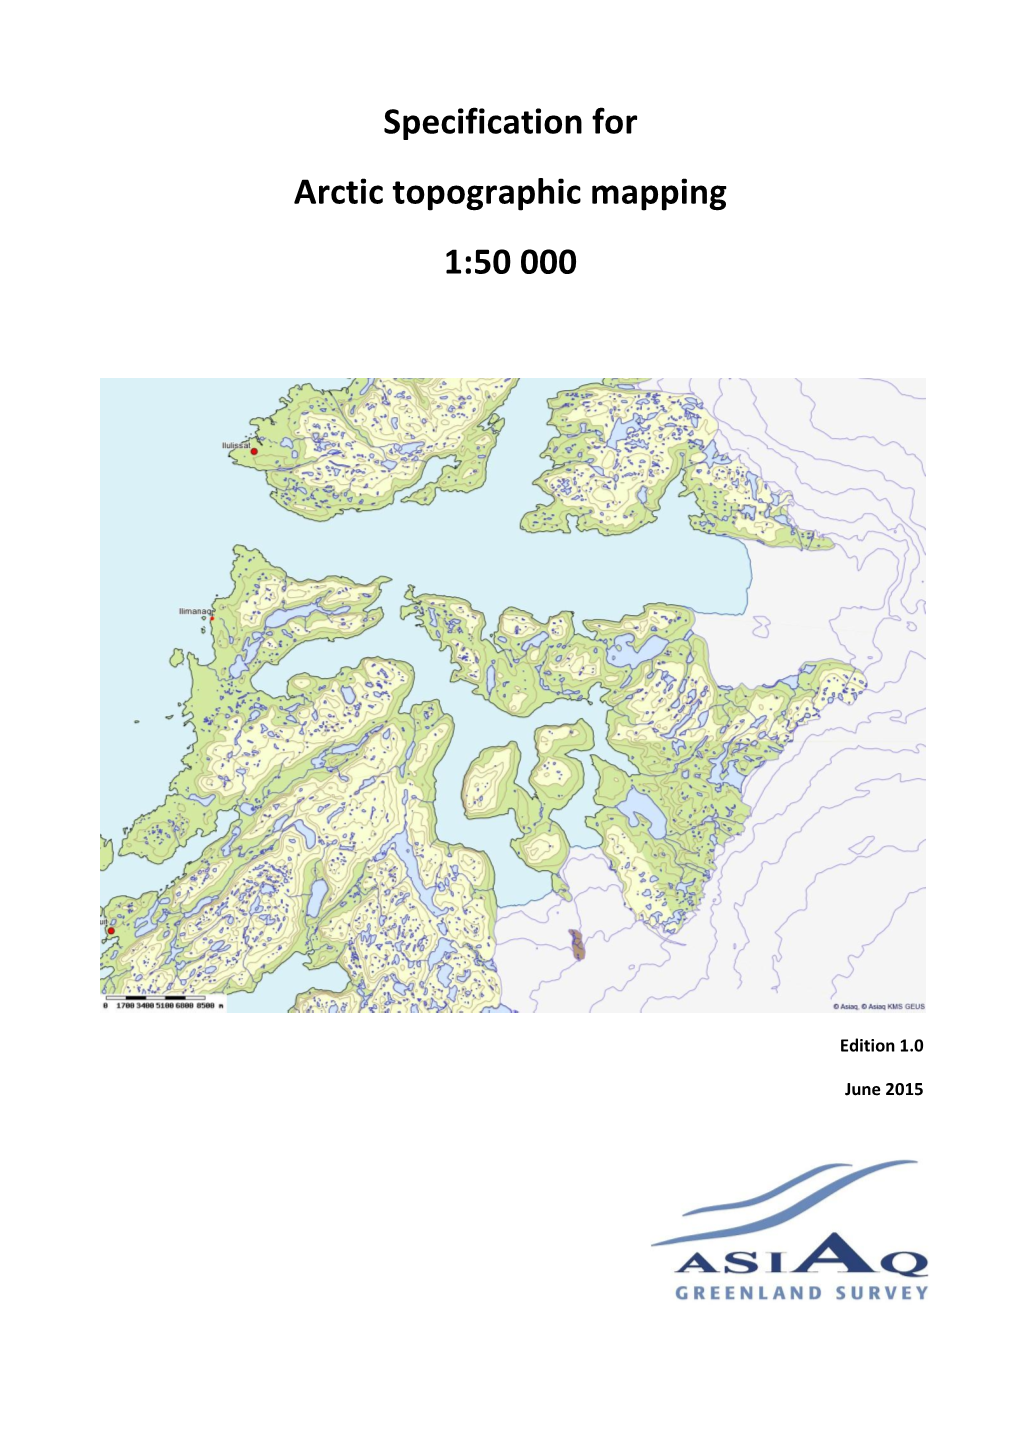 Specification for Arctic Topographic Mapping 1:50 000